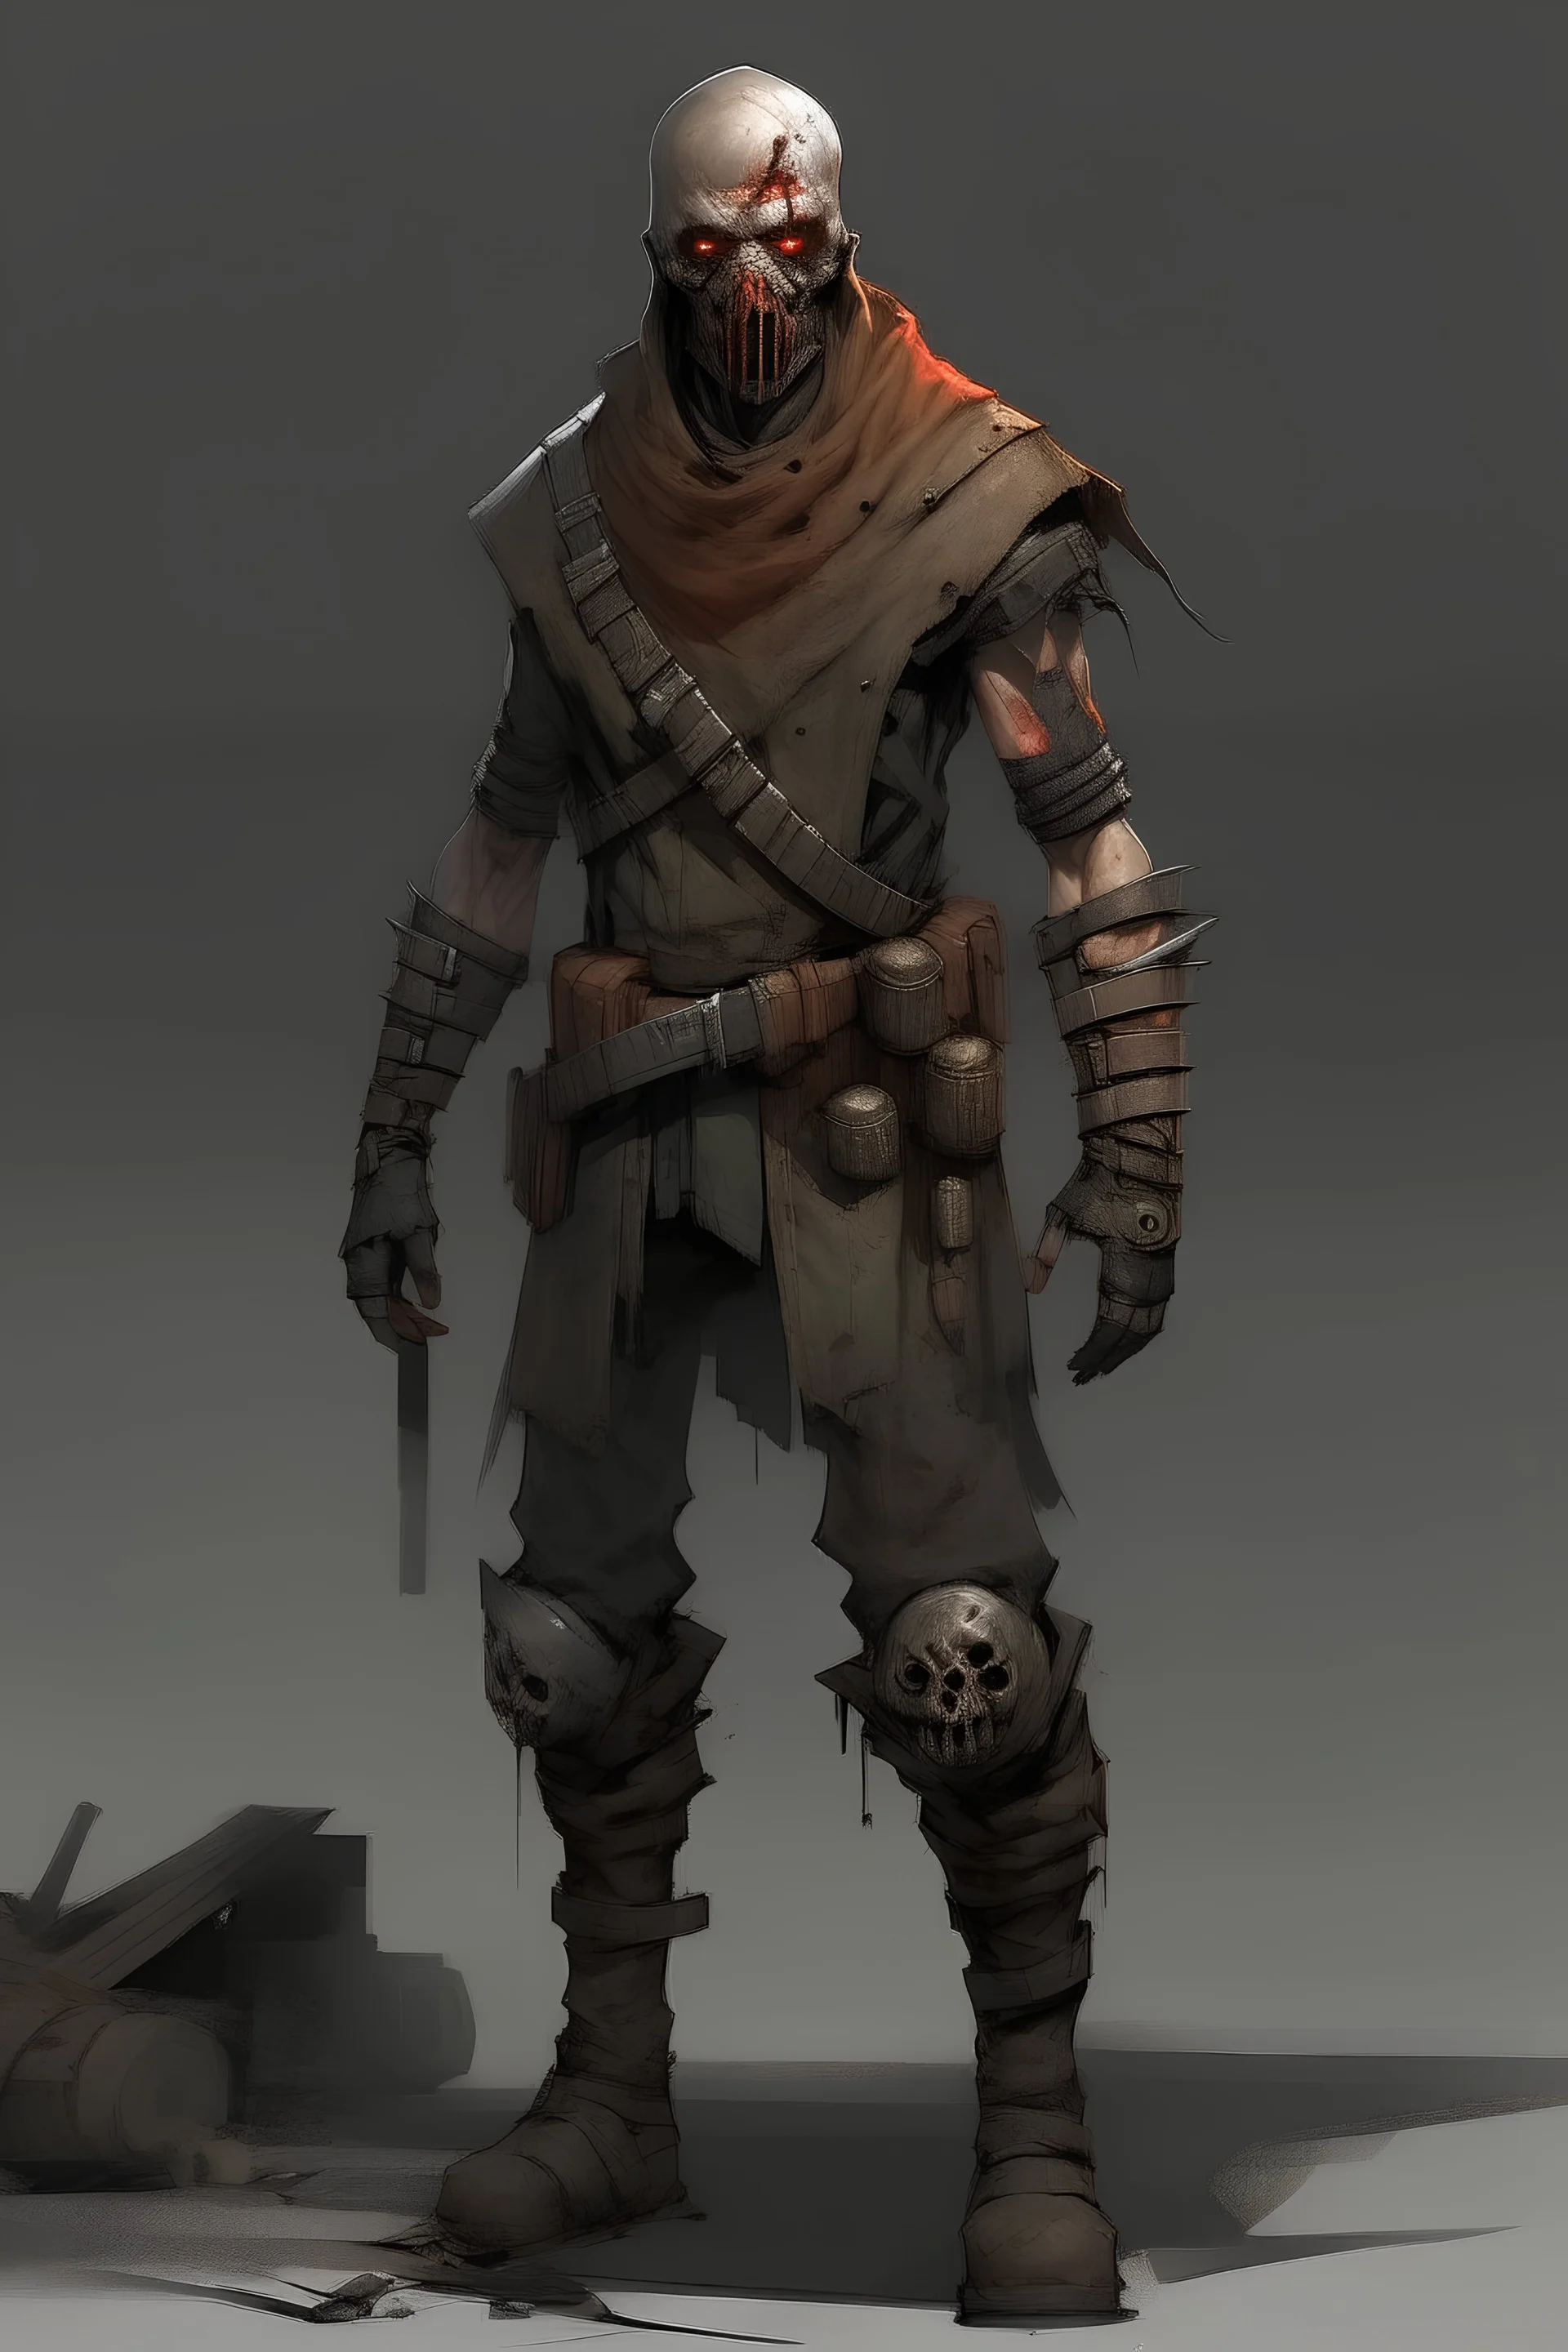 slaughtered bandit body. post-apocalyptic. concept art.